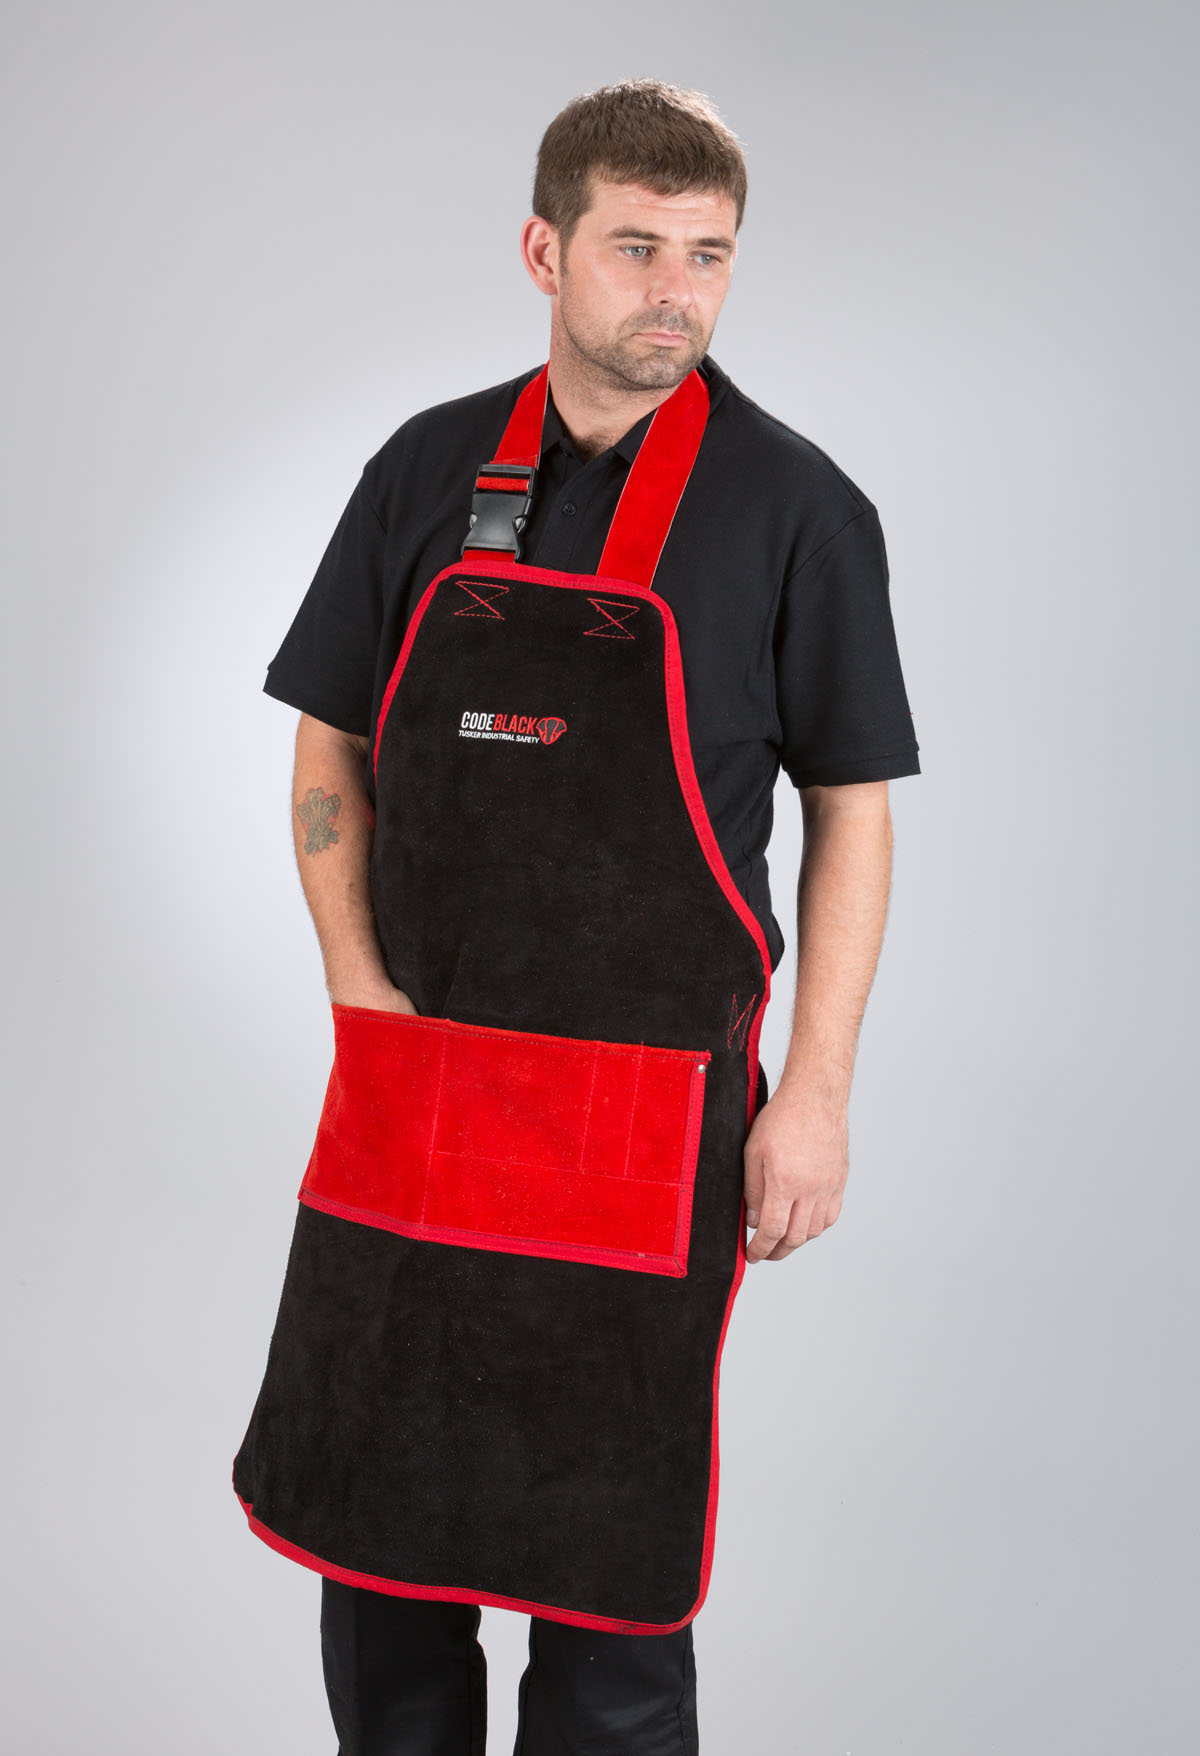 Welding Aprons - Ultimate Protection